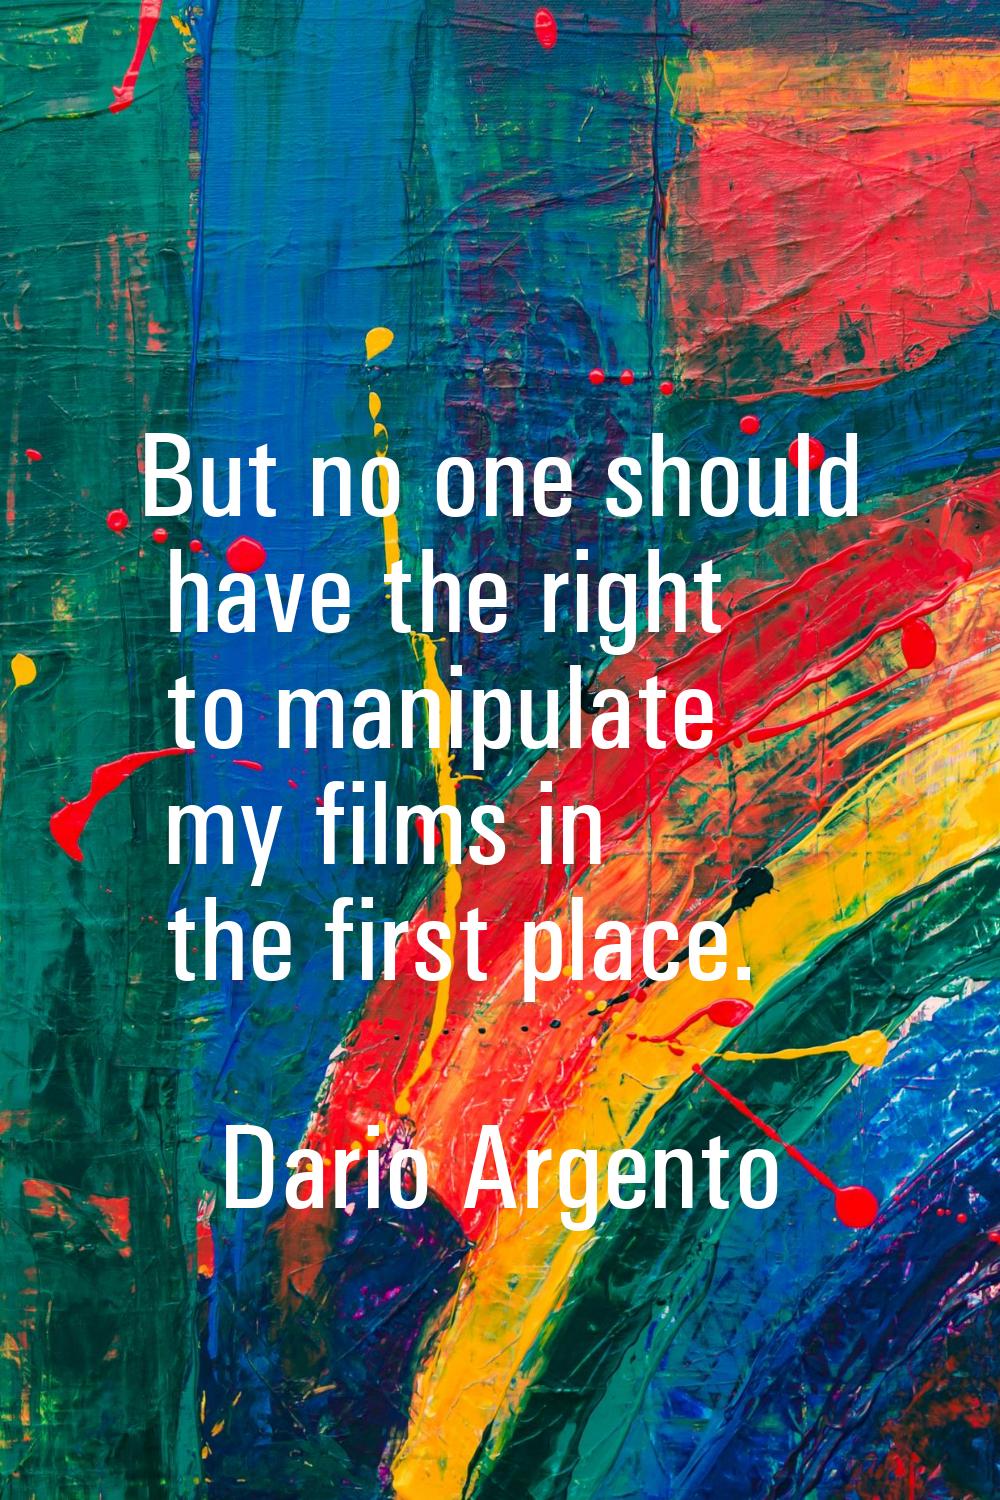 But no one should have the right to manipulate my films in the first place.